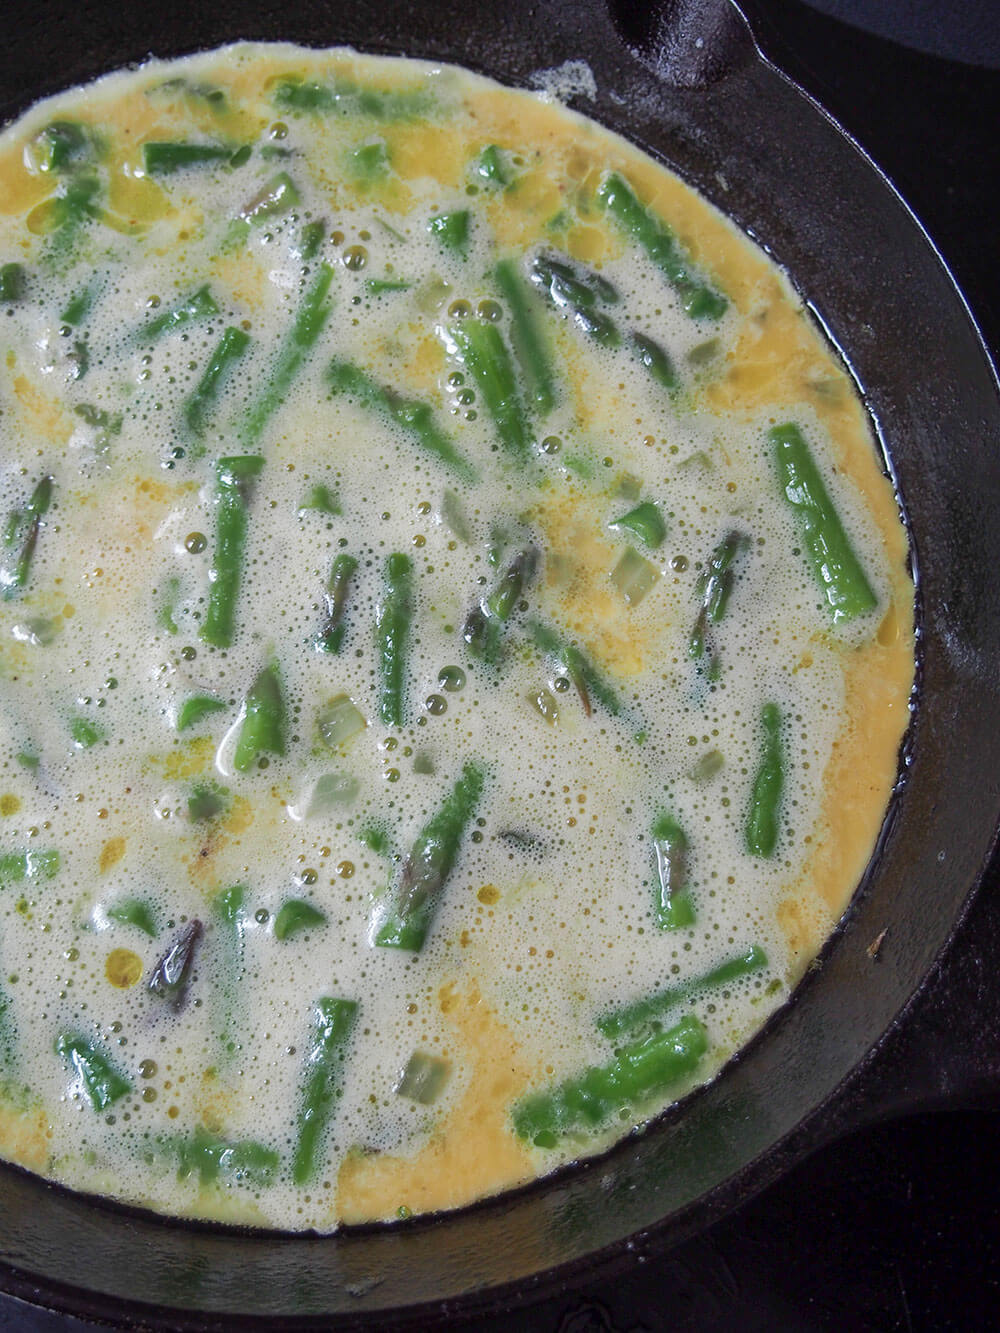 eggs added to asparagus to make frittata